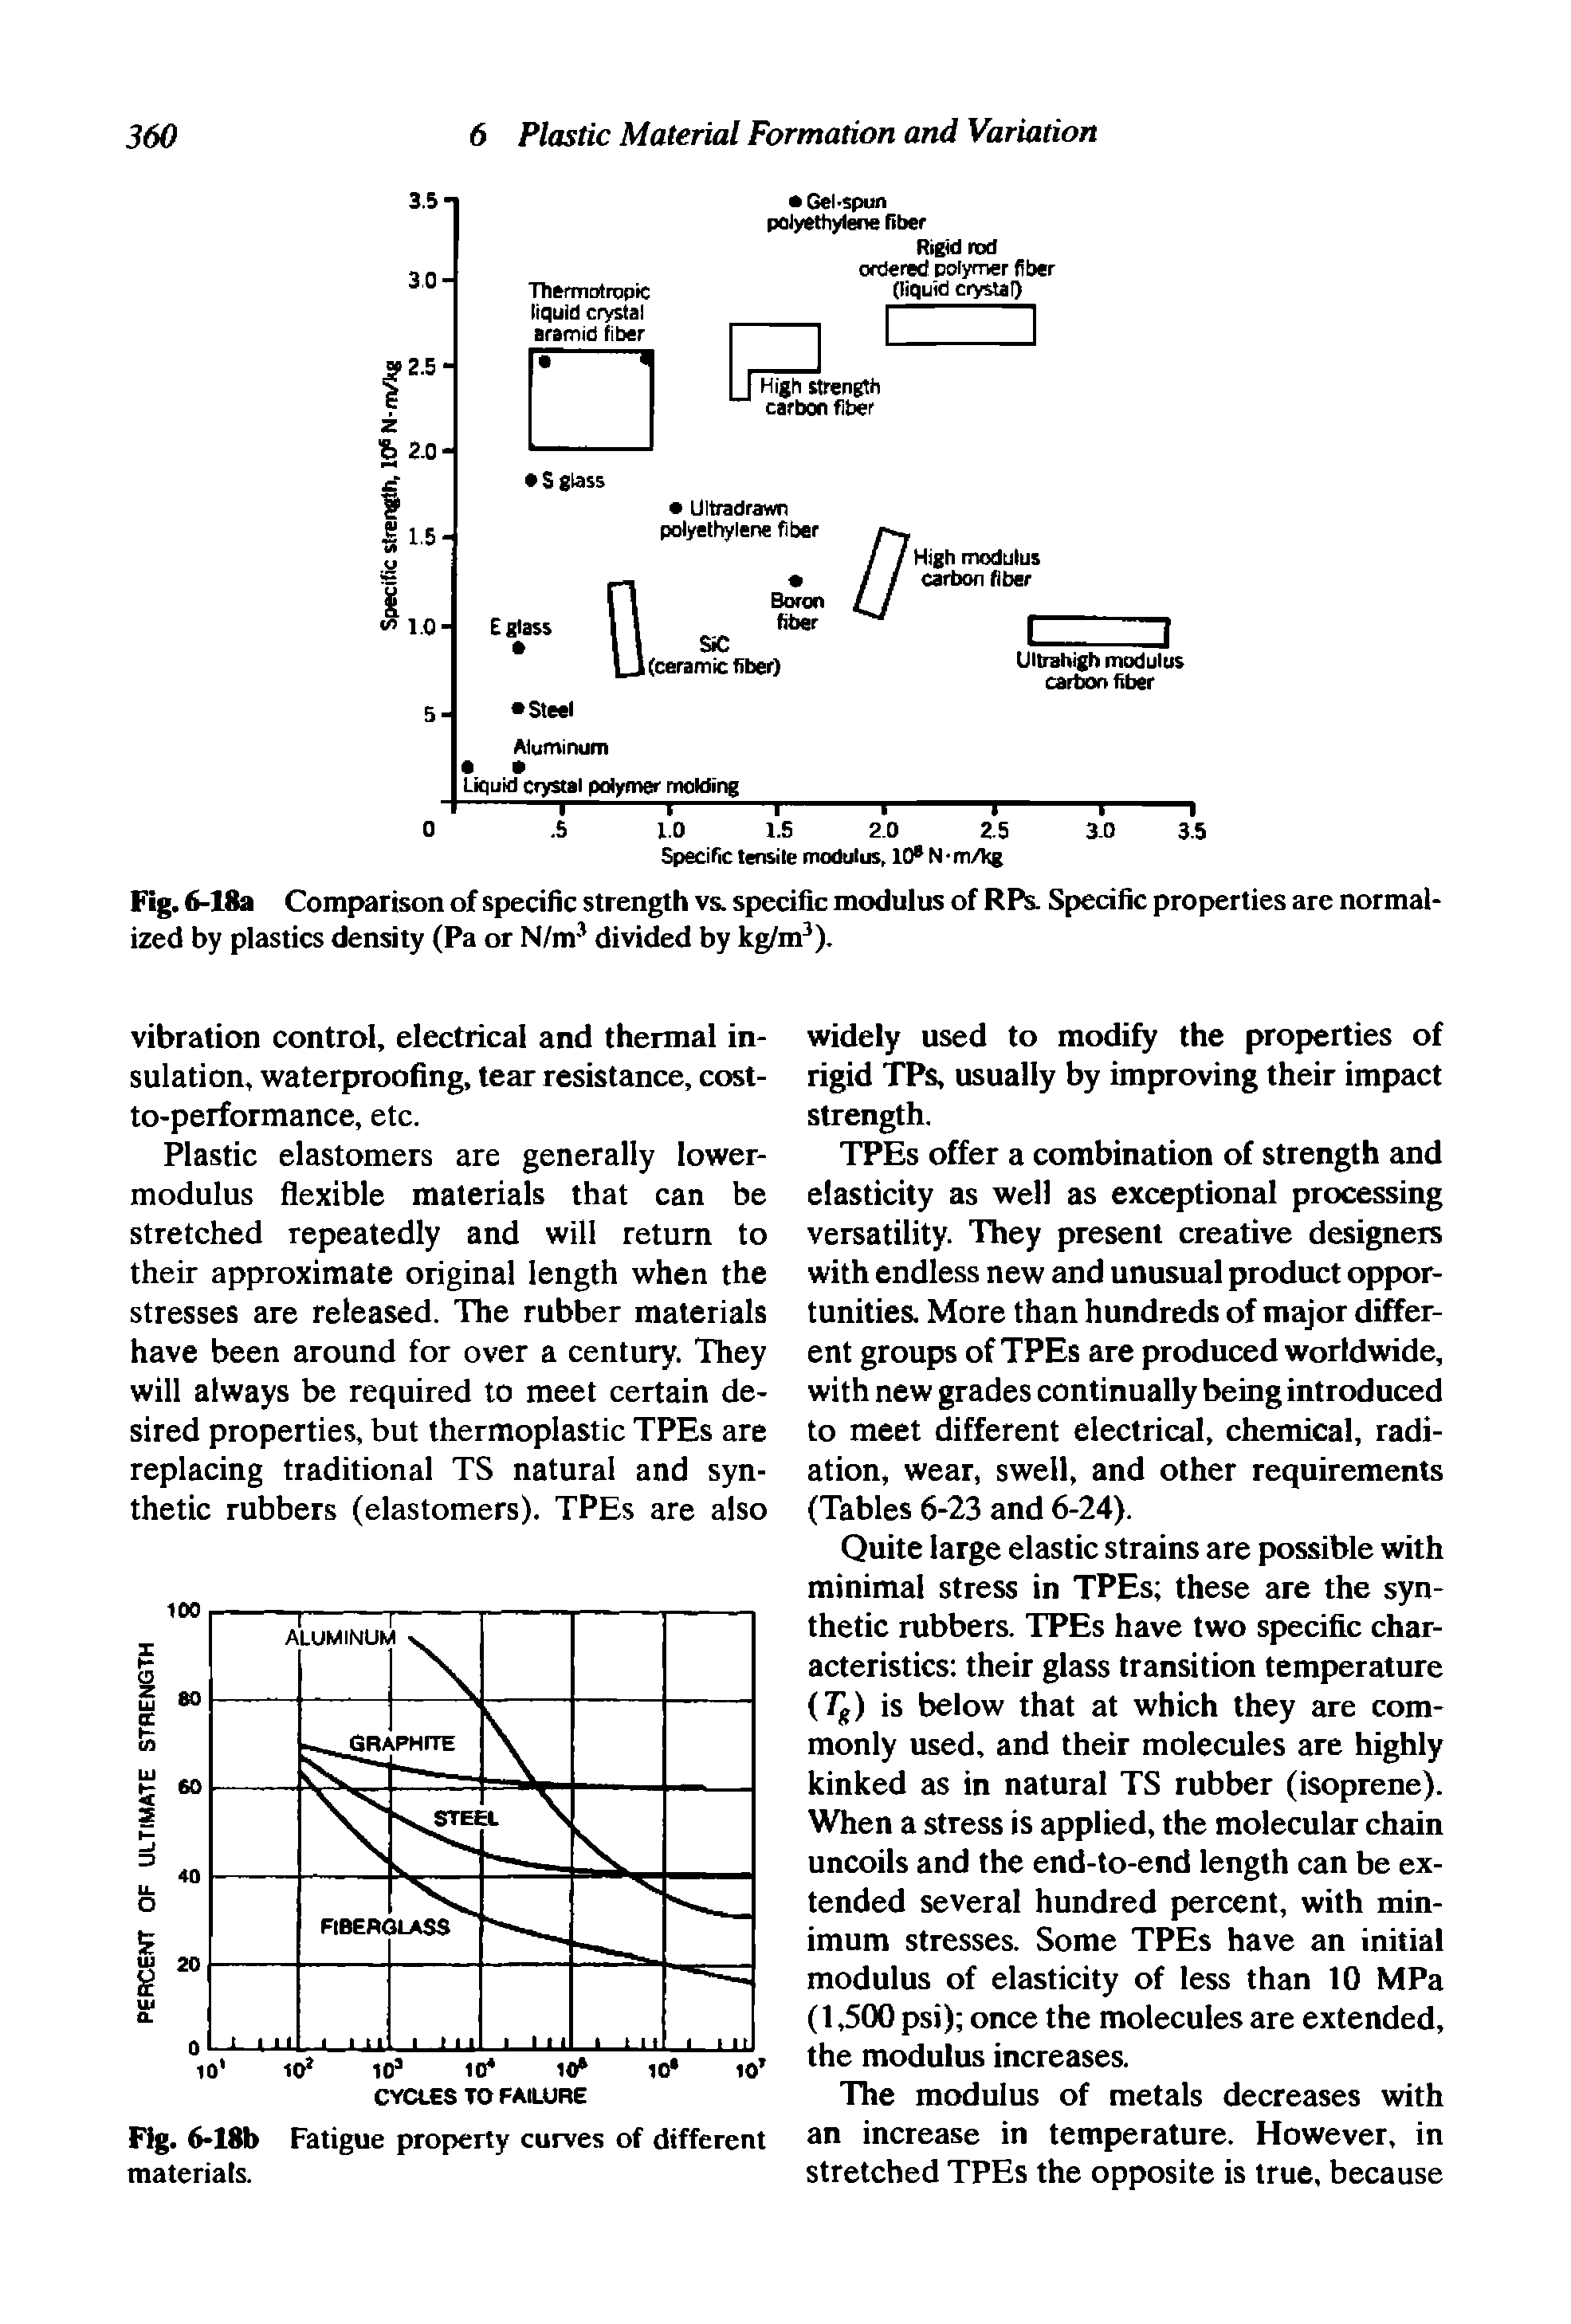 Fig. 6-18a Comparison of specific strength vs. specific modulus of RPs. Specific properties are normalized by plastics density (Pa or N/m3 divided by kg/m3).